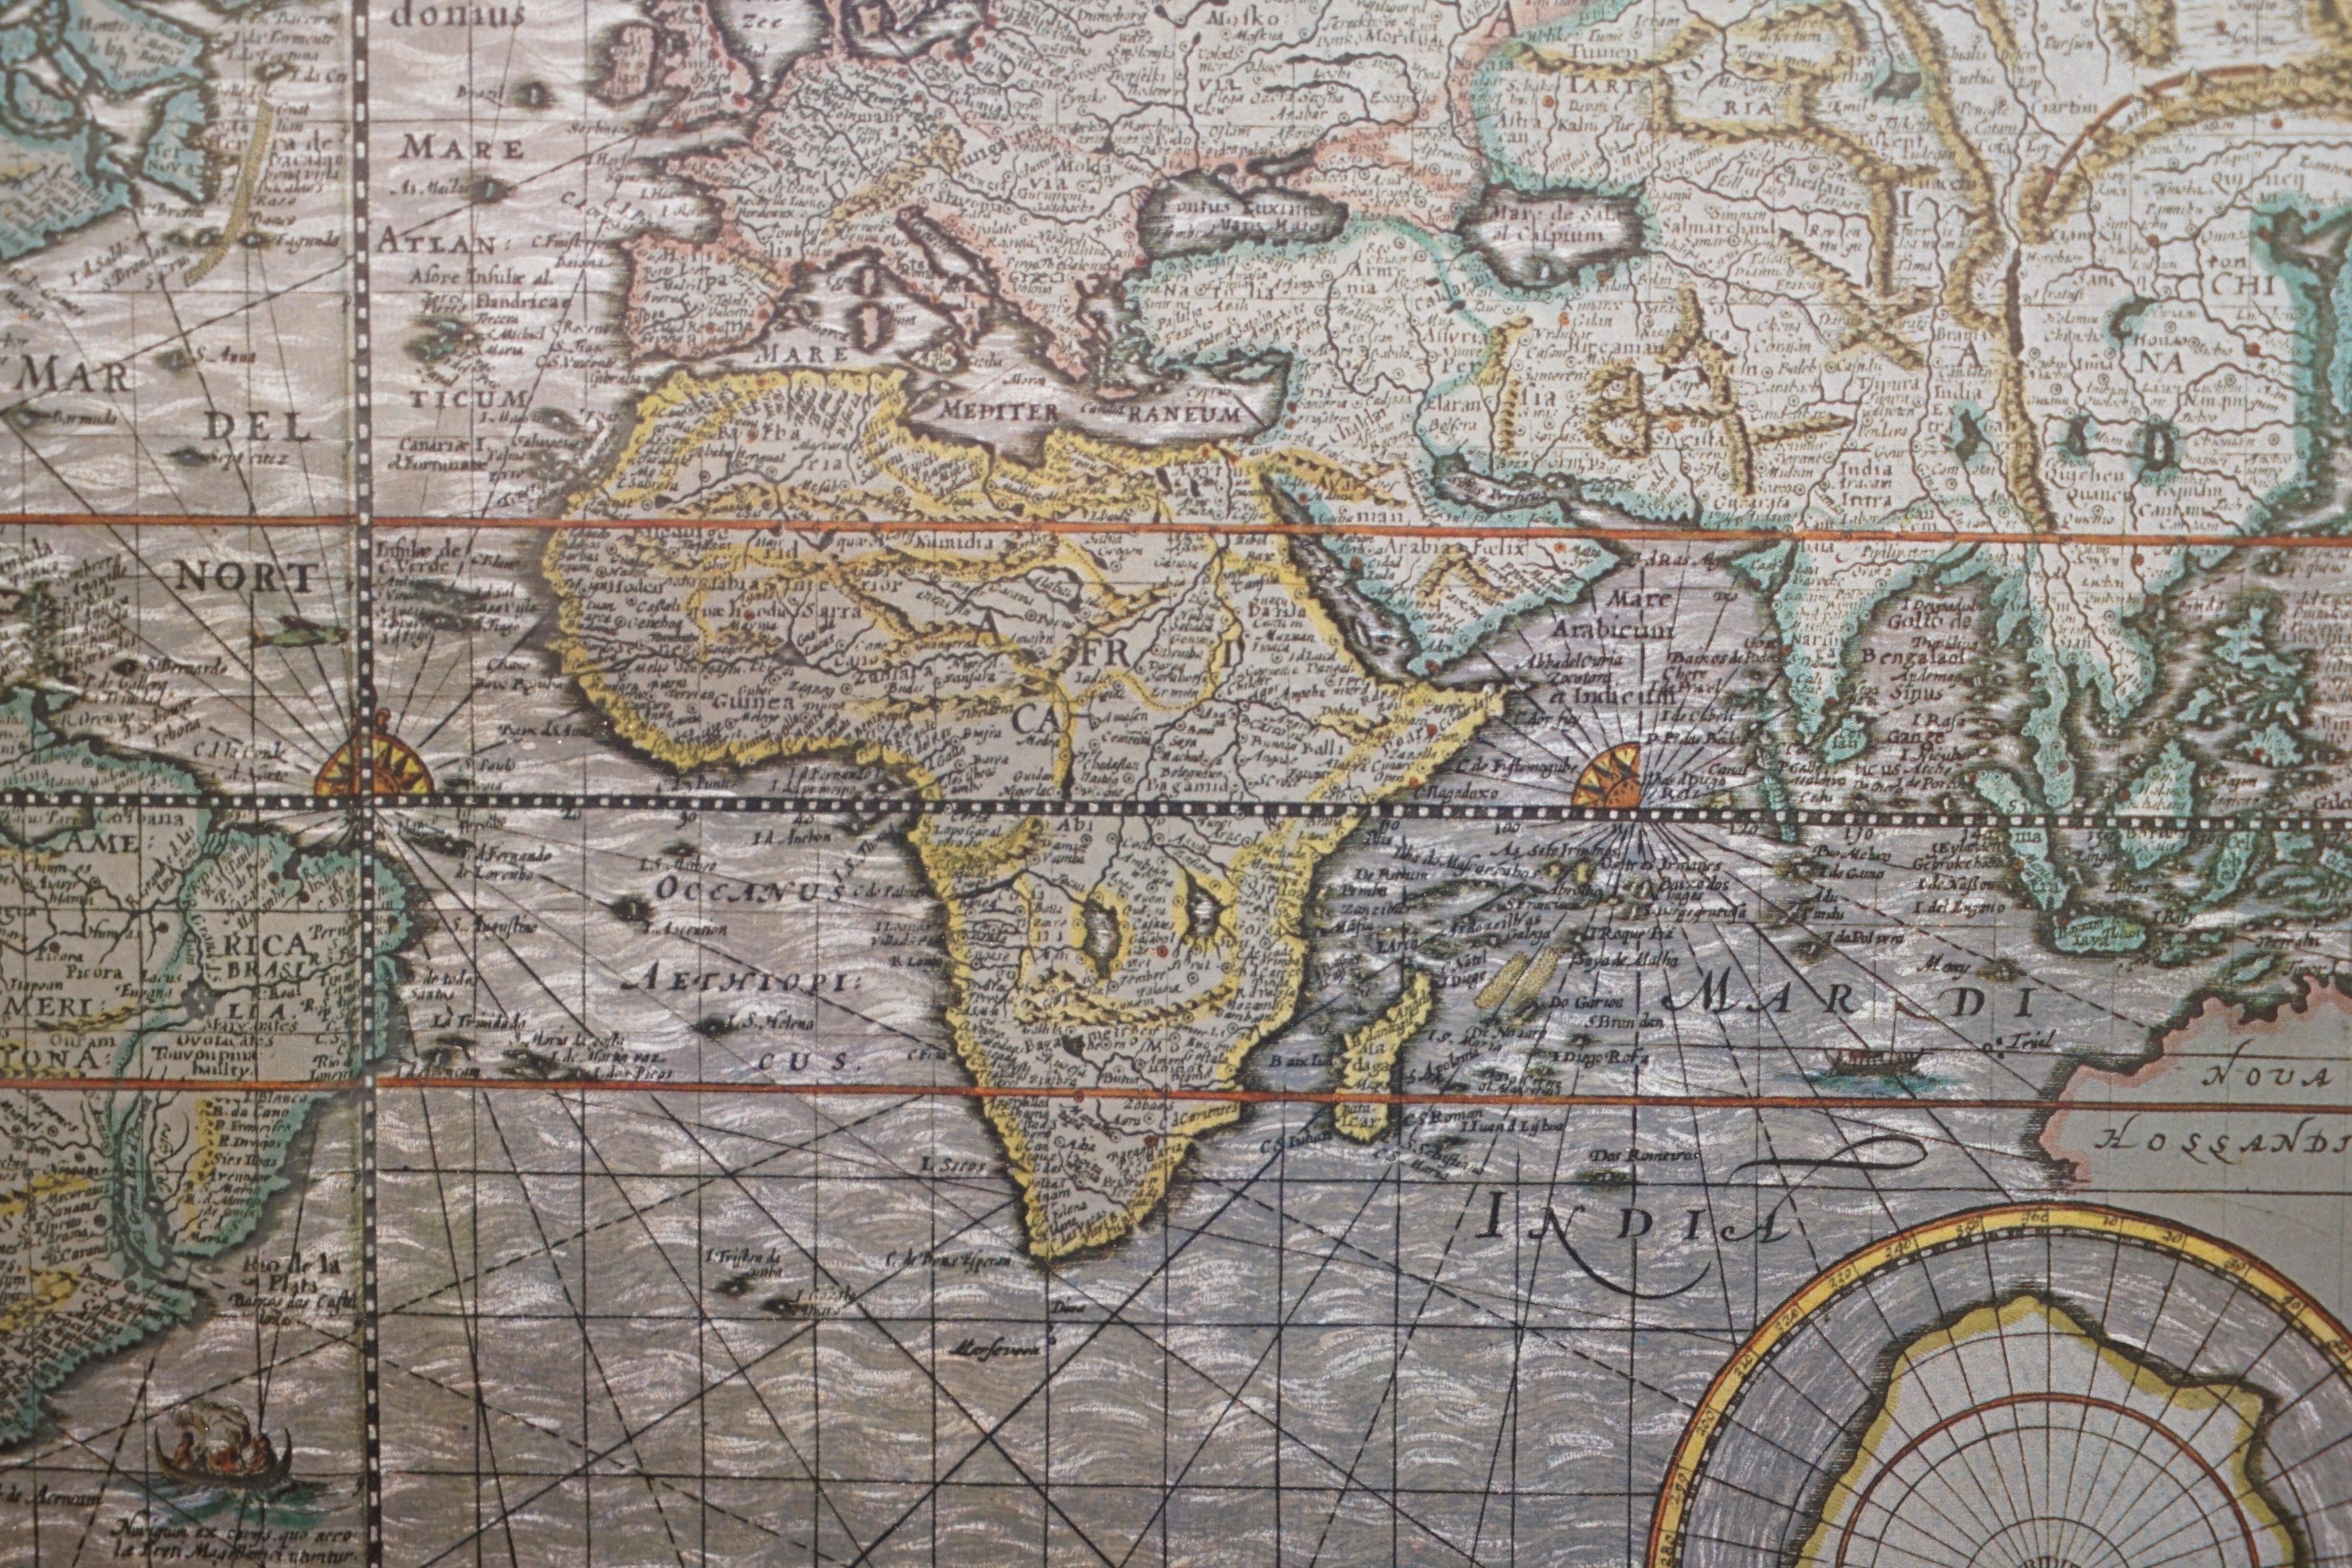 Silver Leaf Foil Wall World Map Engraving Based on the Original Moses Pitt, 1681 For Sale 4